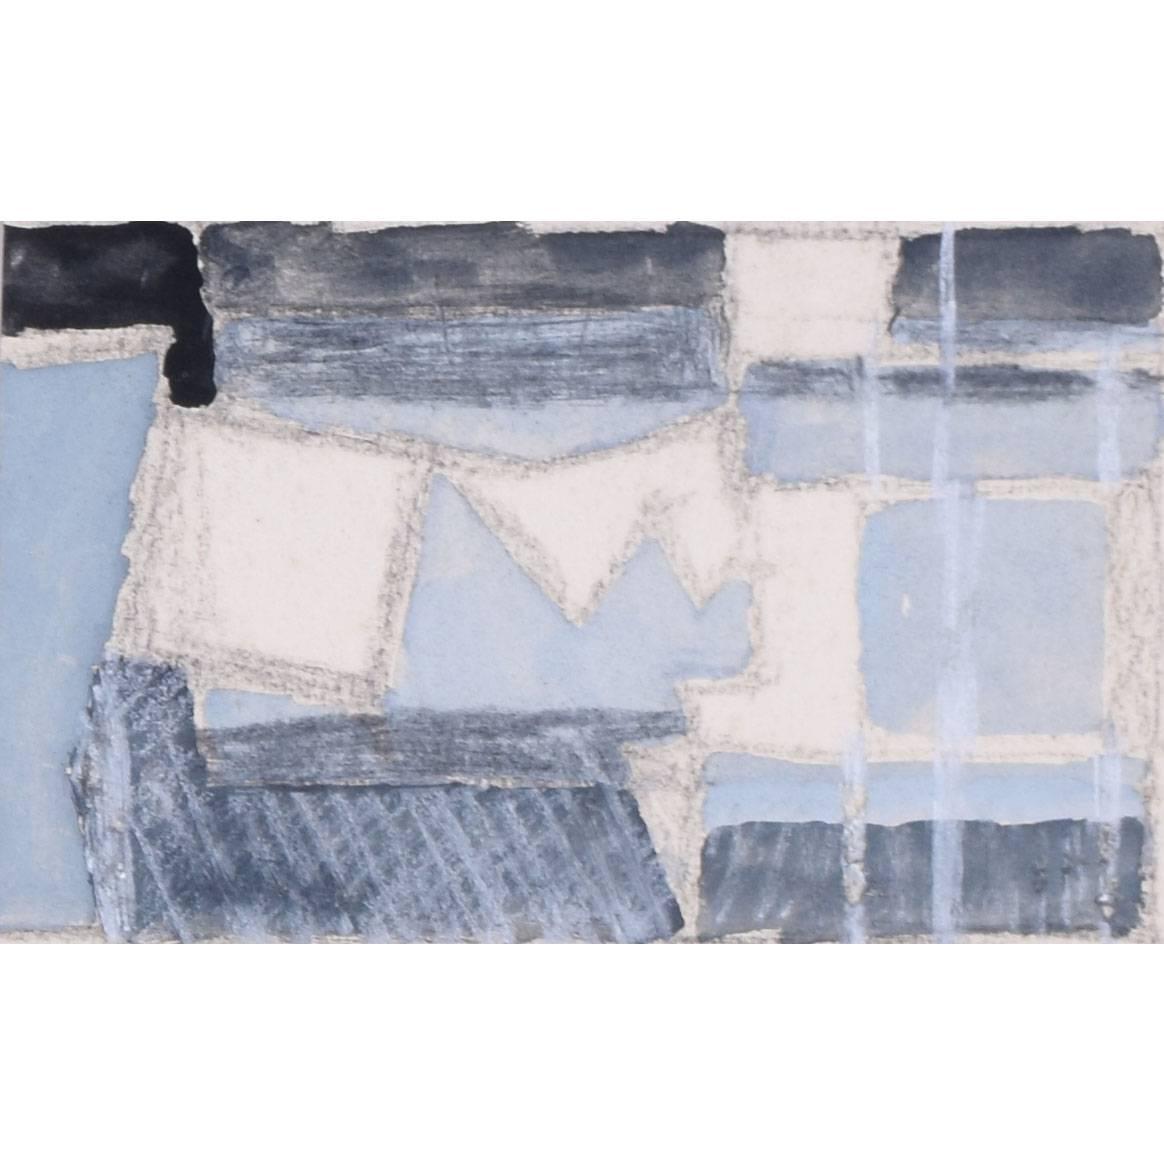 We acquired a series of paintings from Clifford and Rosemary Ellis's studio. To find more scroll down to "More from this Seller" and below it click on "See all from this seller." 

Clifford Ellis (1907-1985)
Grey & Black Abstract